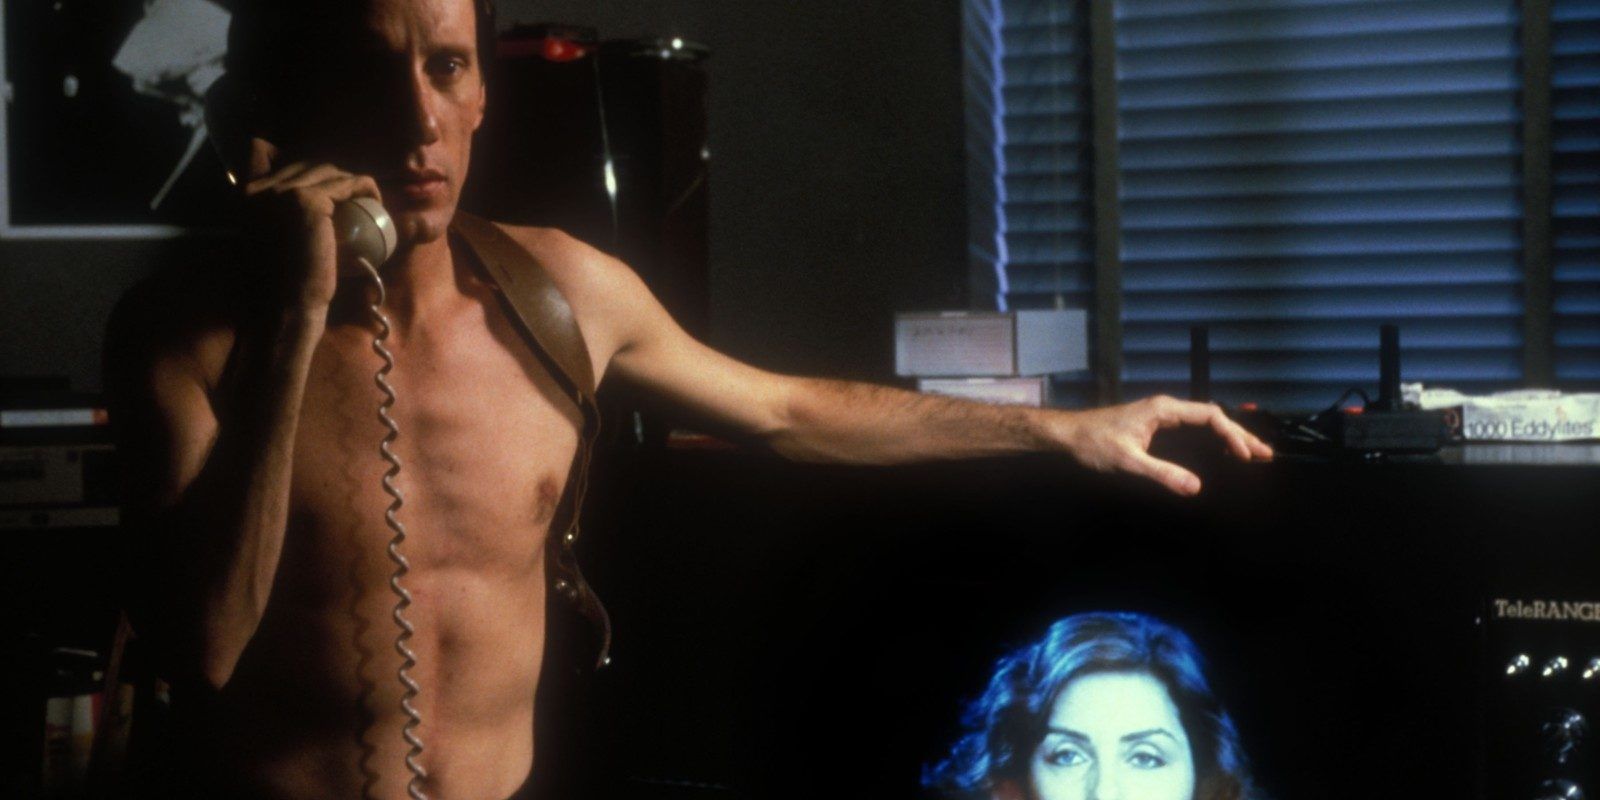 A topless man on the phone in Videodrome